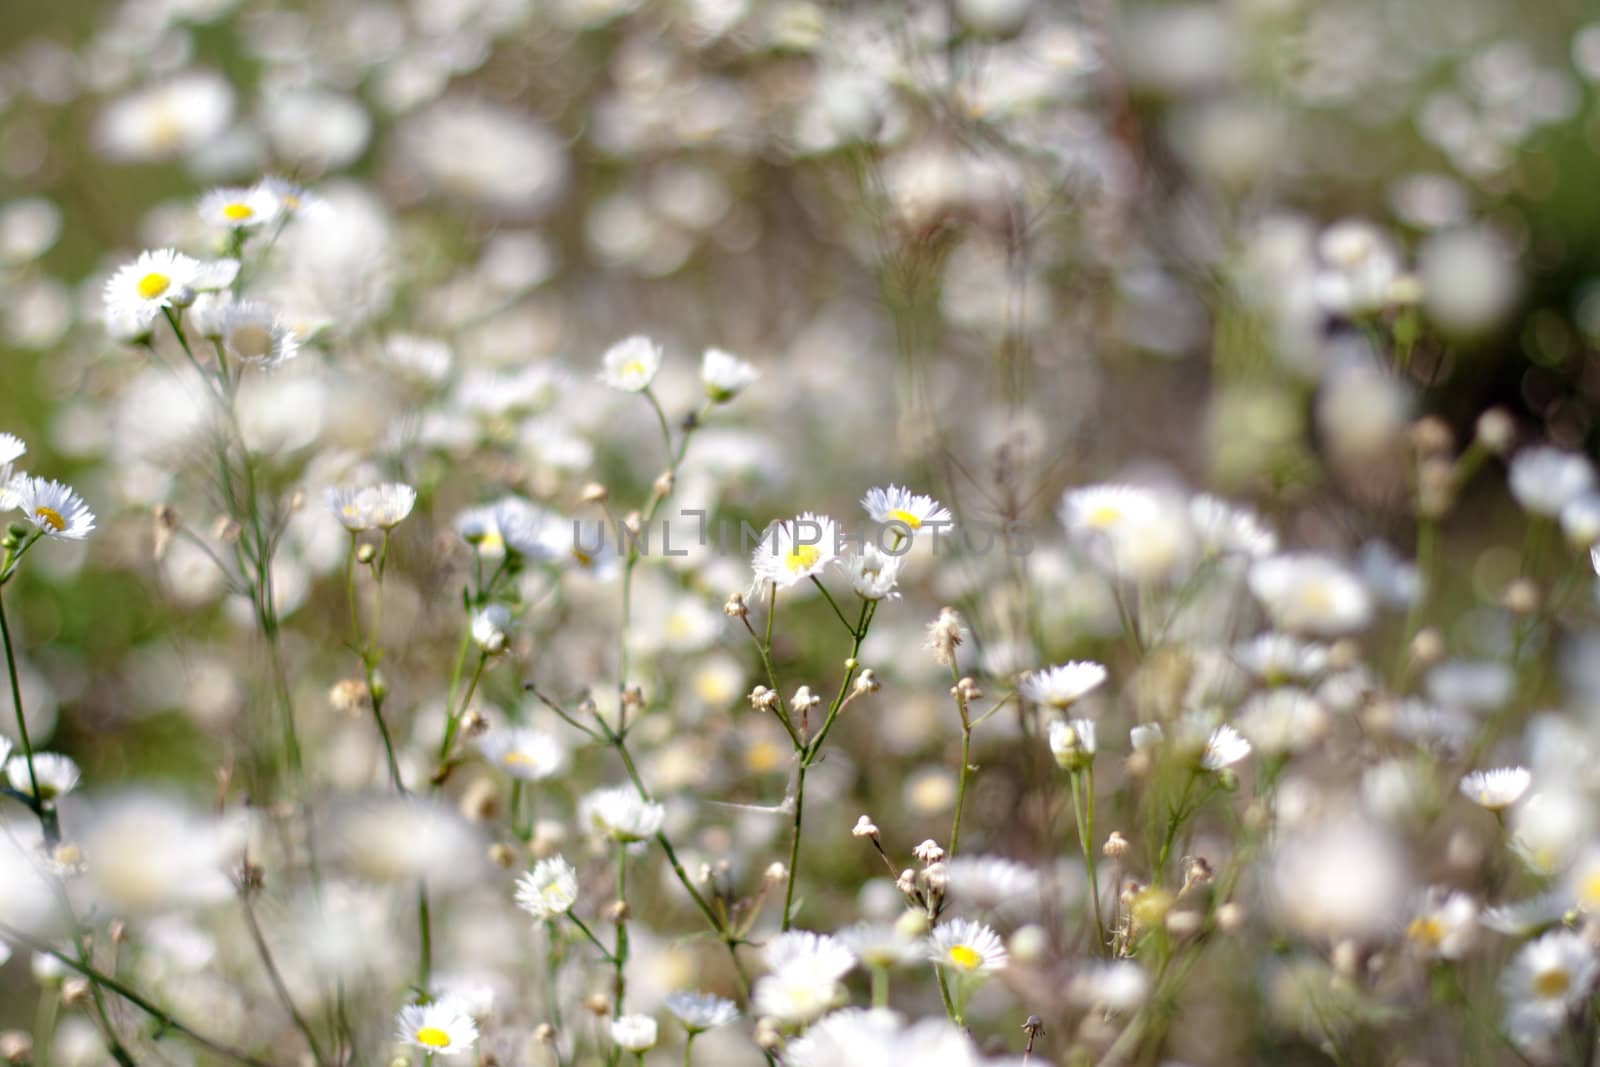 Chamomile not sharp against the background of daisies